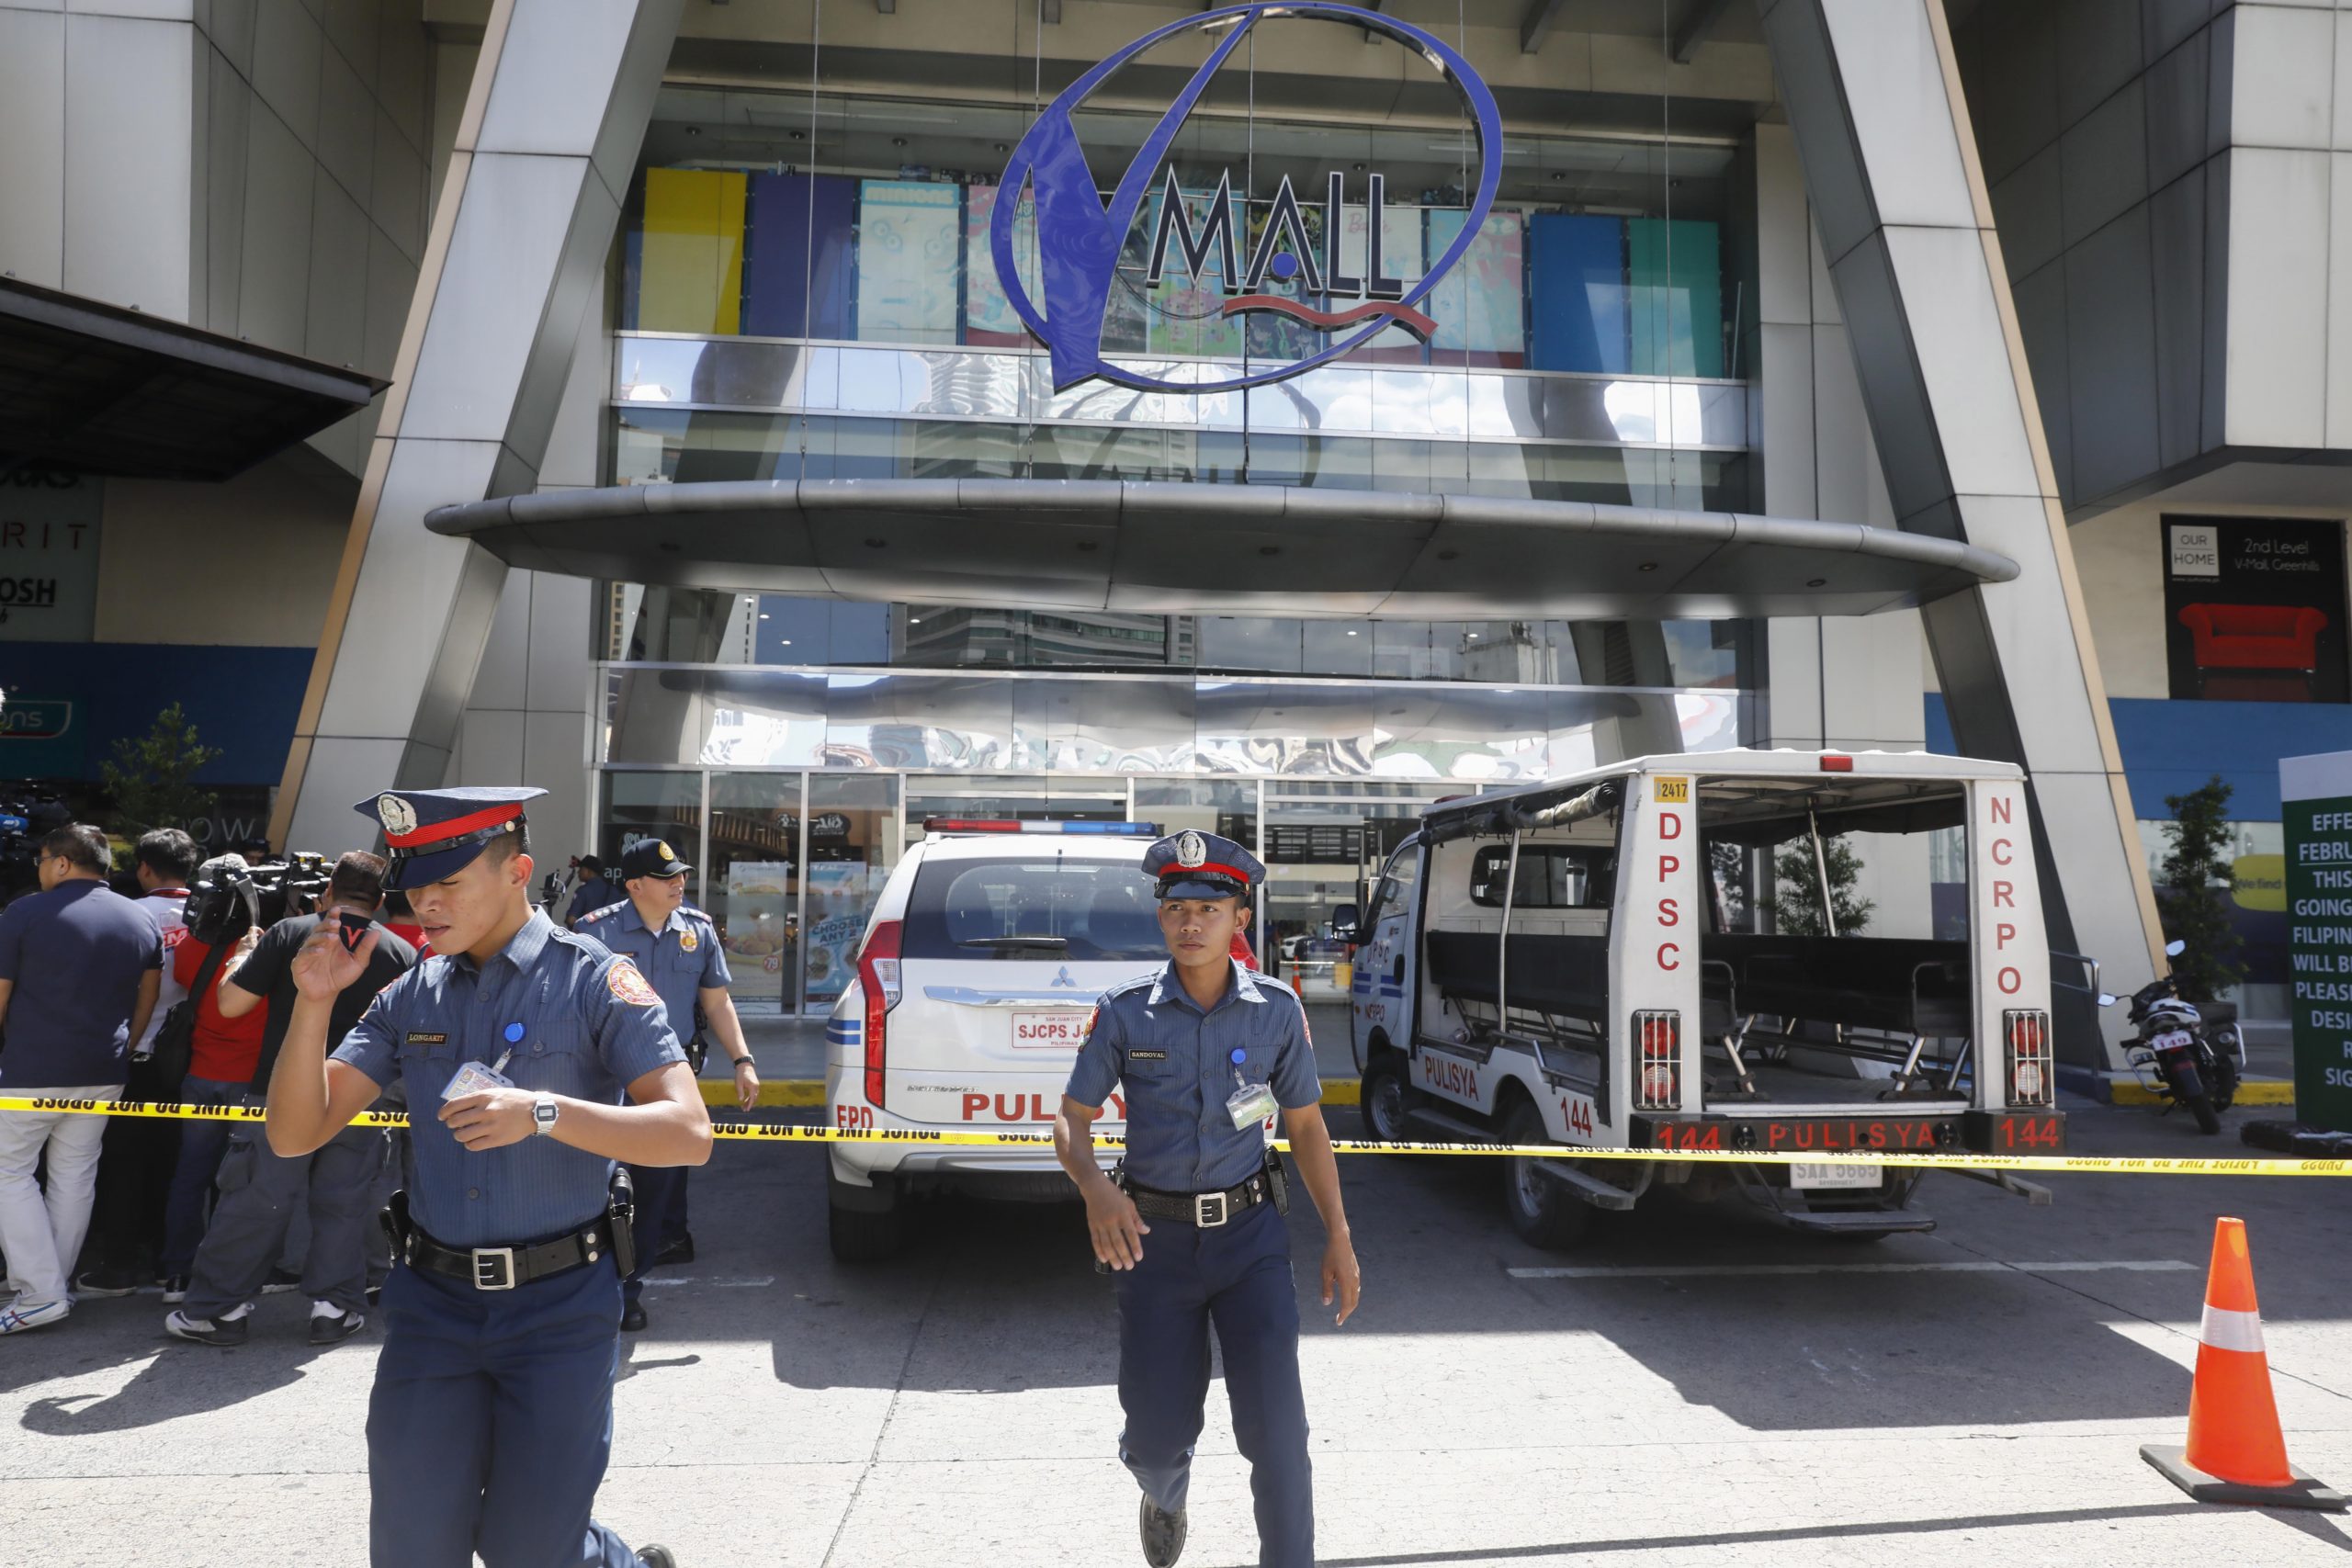 epa08263821 Philippine police secure the entrance to a shopping mall following a shooting incident in San Juan City, Philippines, 02 March 2020. Reports stated that an armed man believed to be a disgruntled security guard was involved in a shooting incident inside the mall wherein one person was confirmed injured and several people were taken hostage by the gunman. The San Juan City mayor said that negotiation efforts are underway to end the situation.  EPA/ROLEX DELA PENA